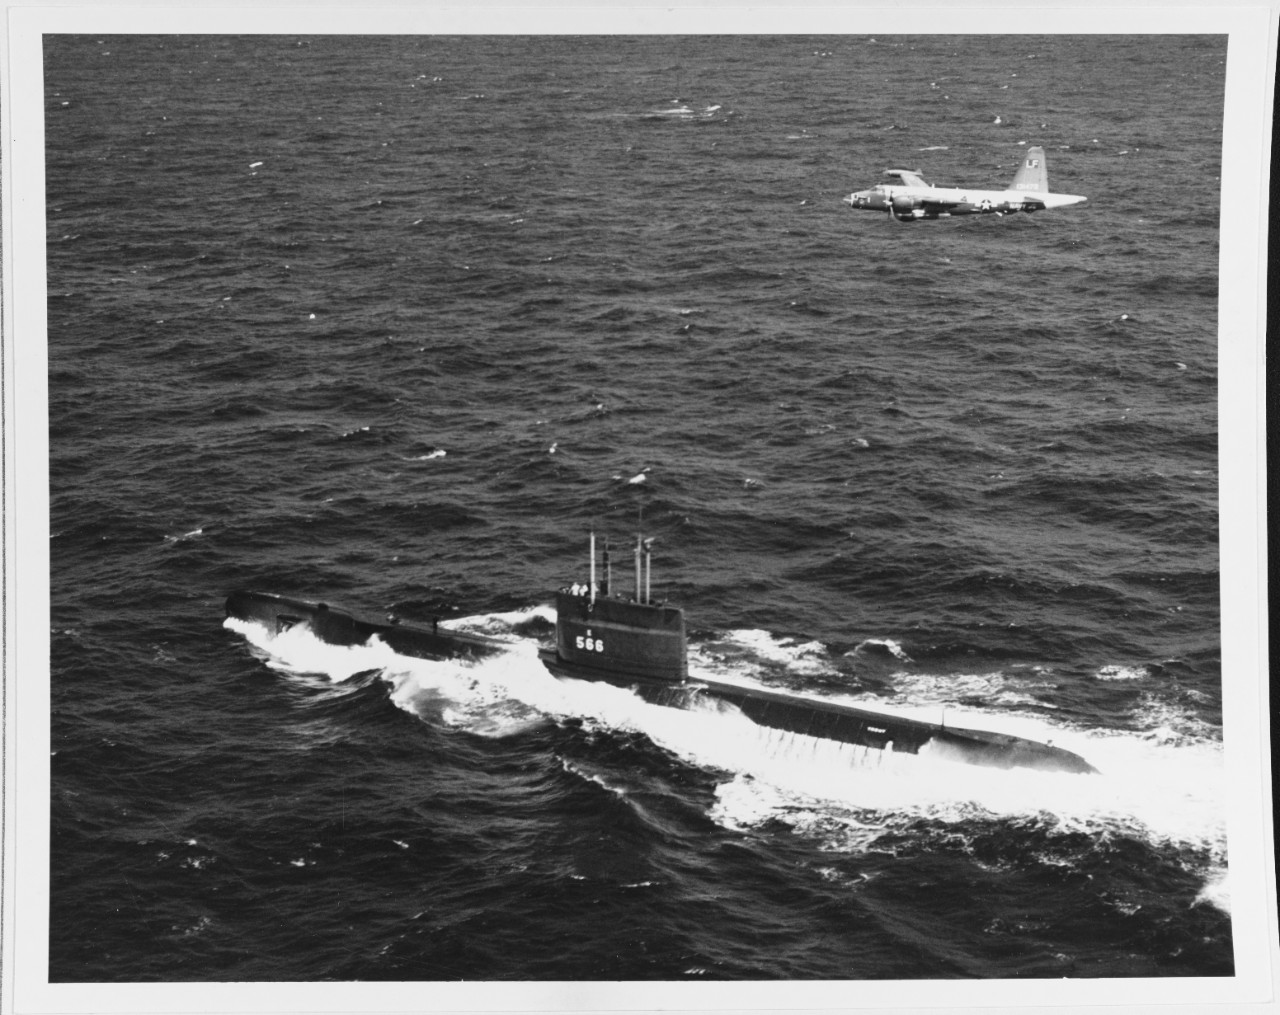 A P-2H "NEPTUNE" Patrol Plane of Patrol Squadron 16 flies over USS TROUT (SS-566)